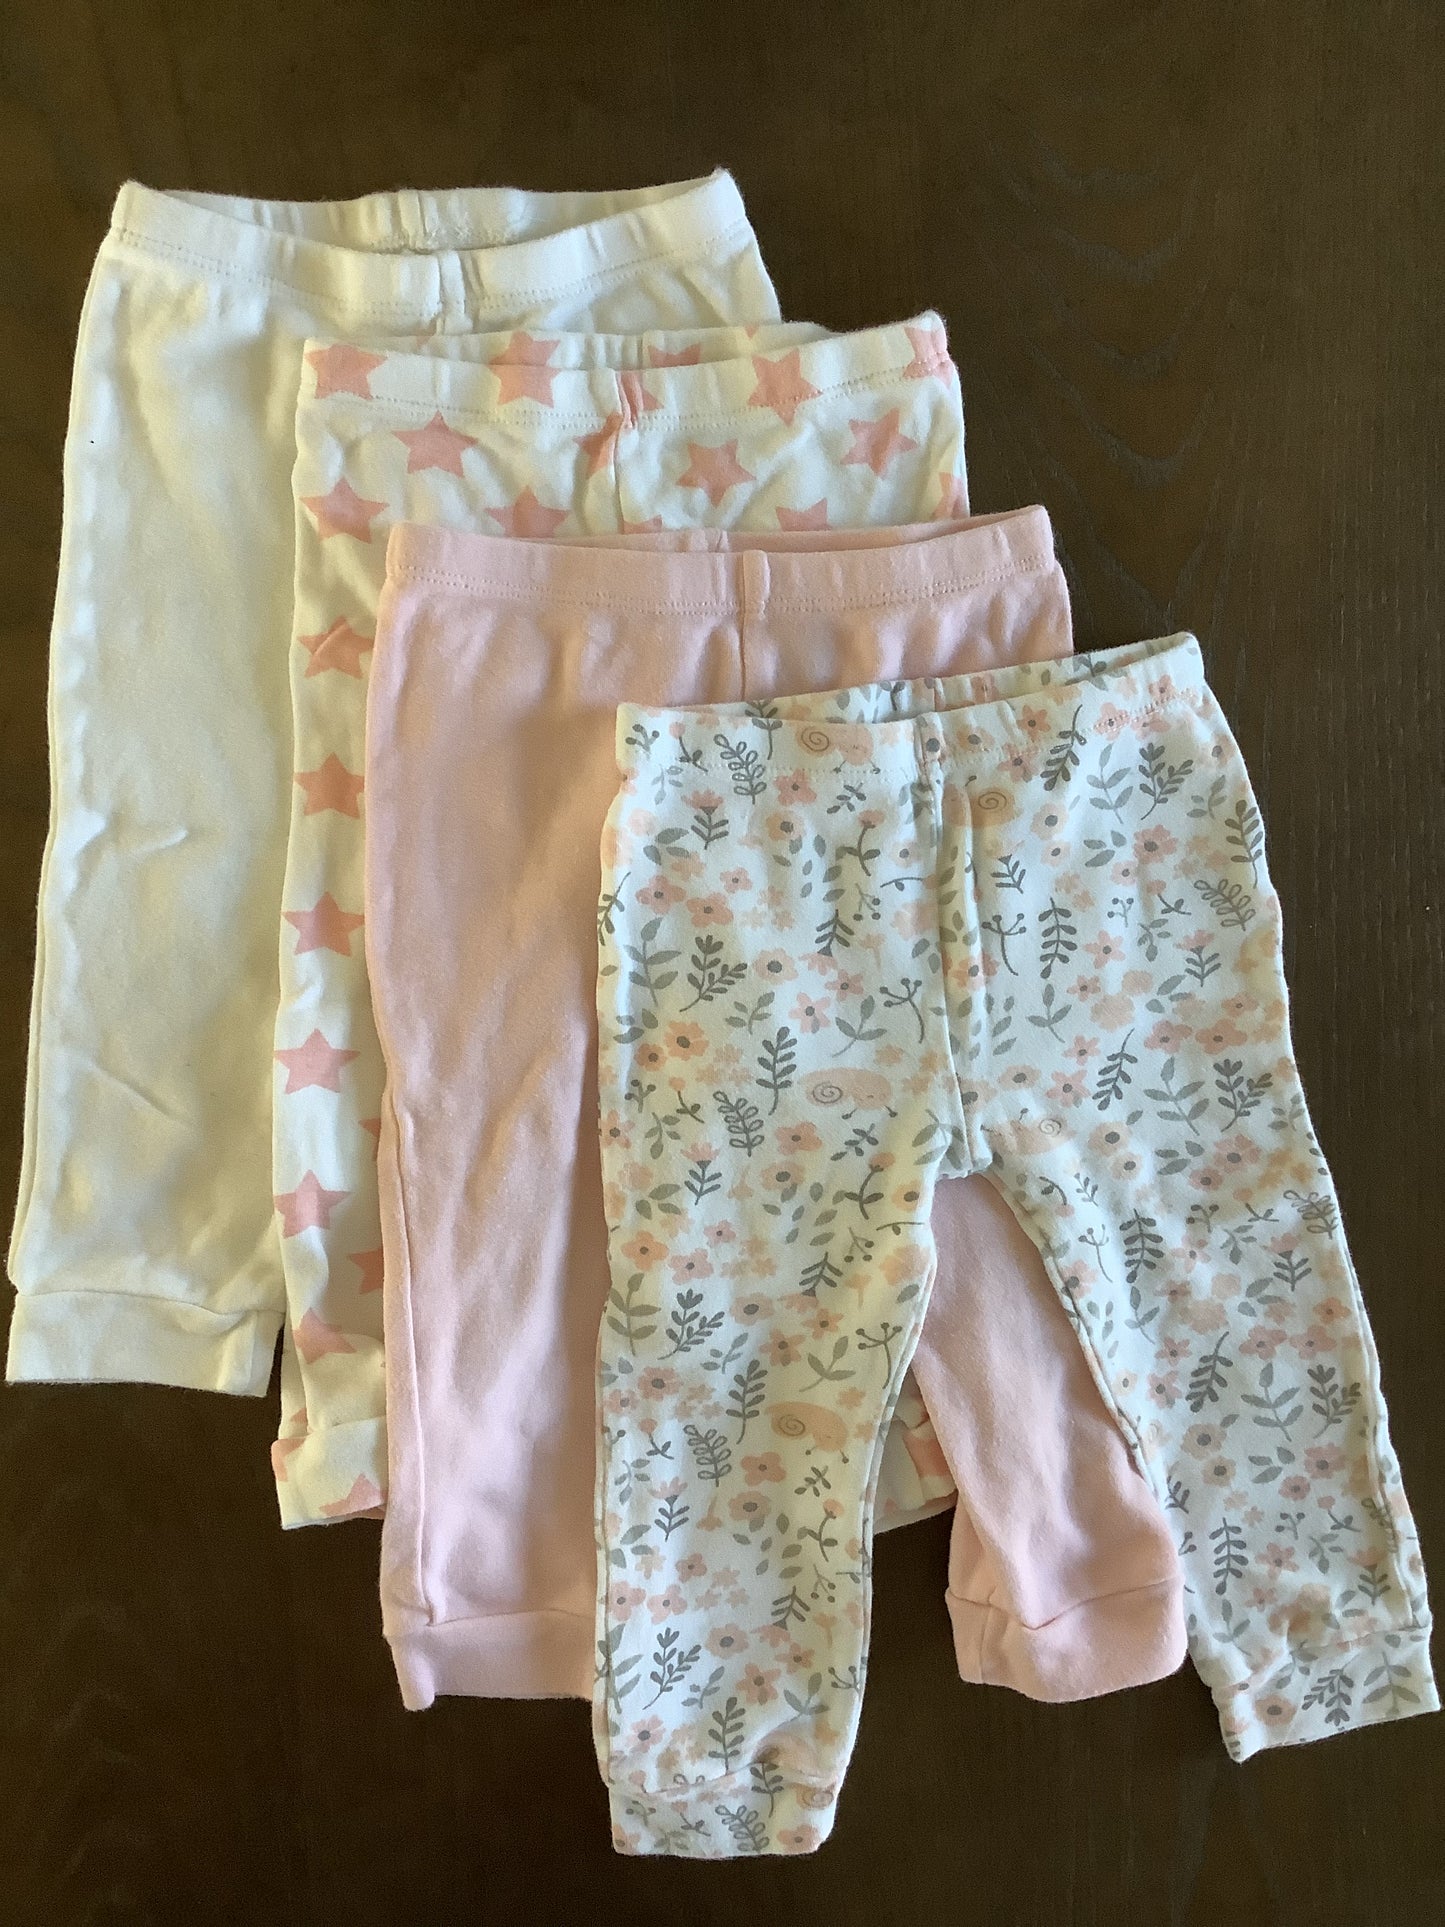 PS set of 4 leggings girls size 24 months/2T